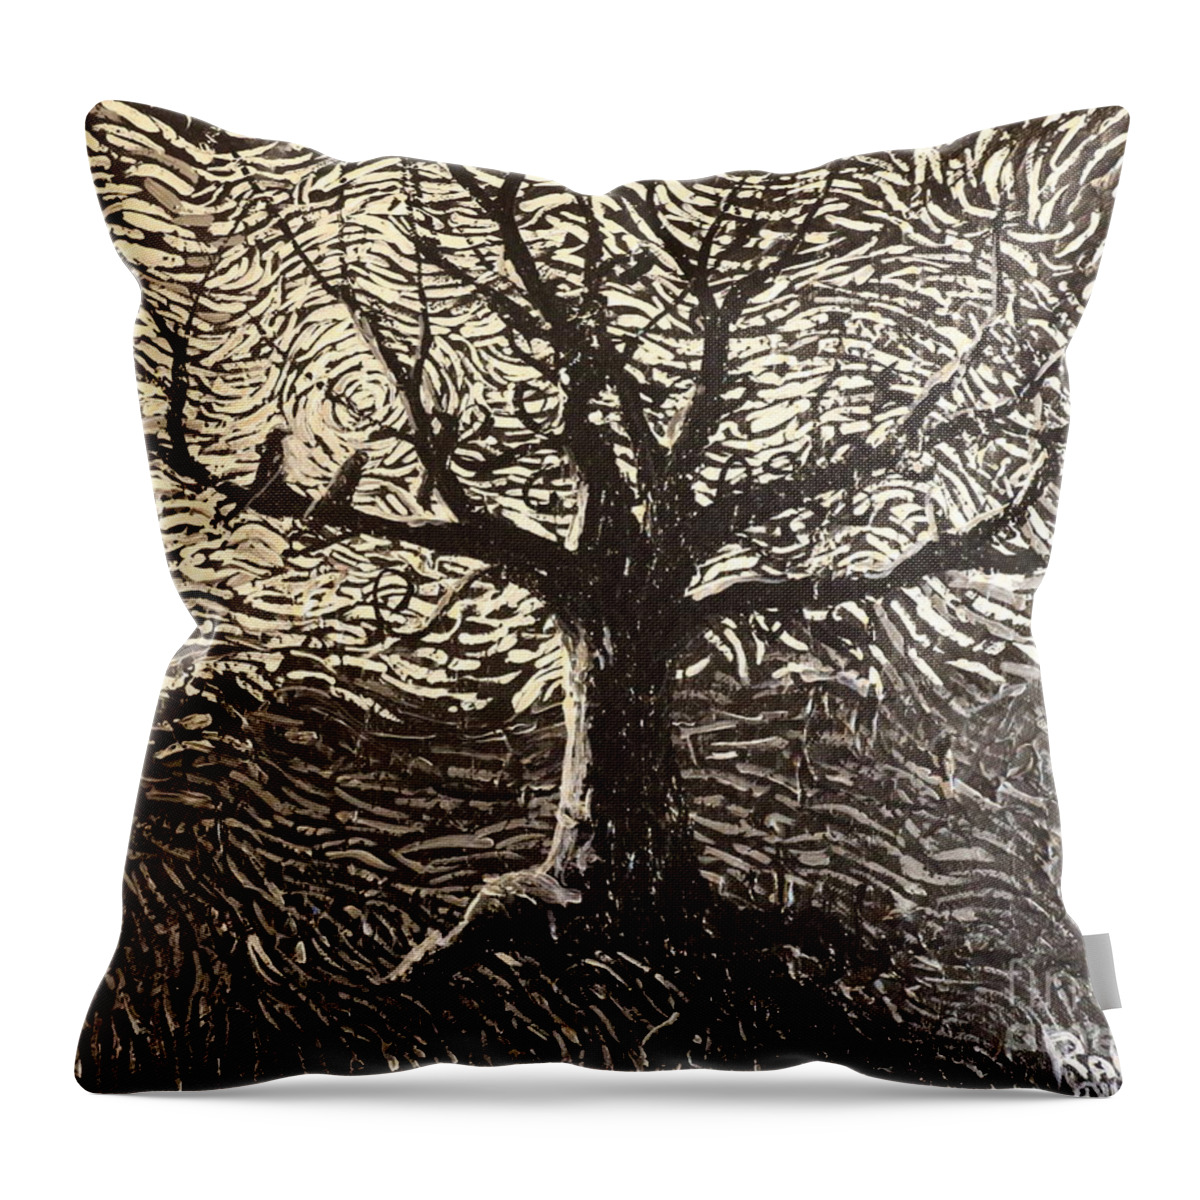  Throw Pillow featuring the painting Raven Tree by Stefan Duncan